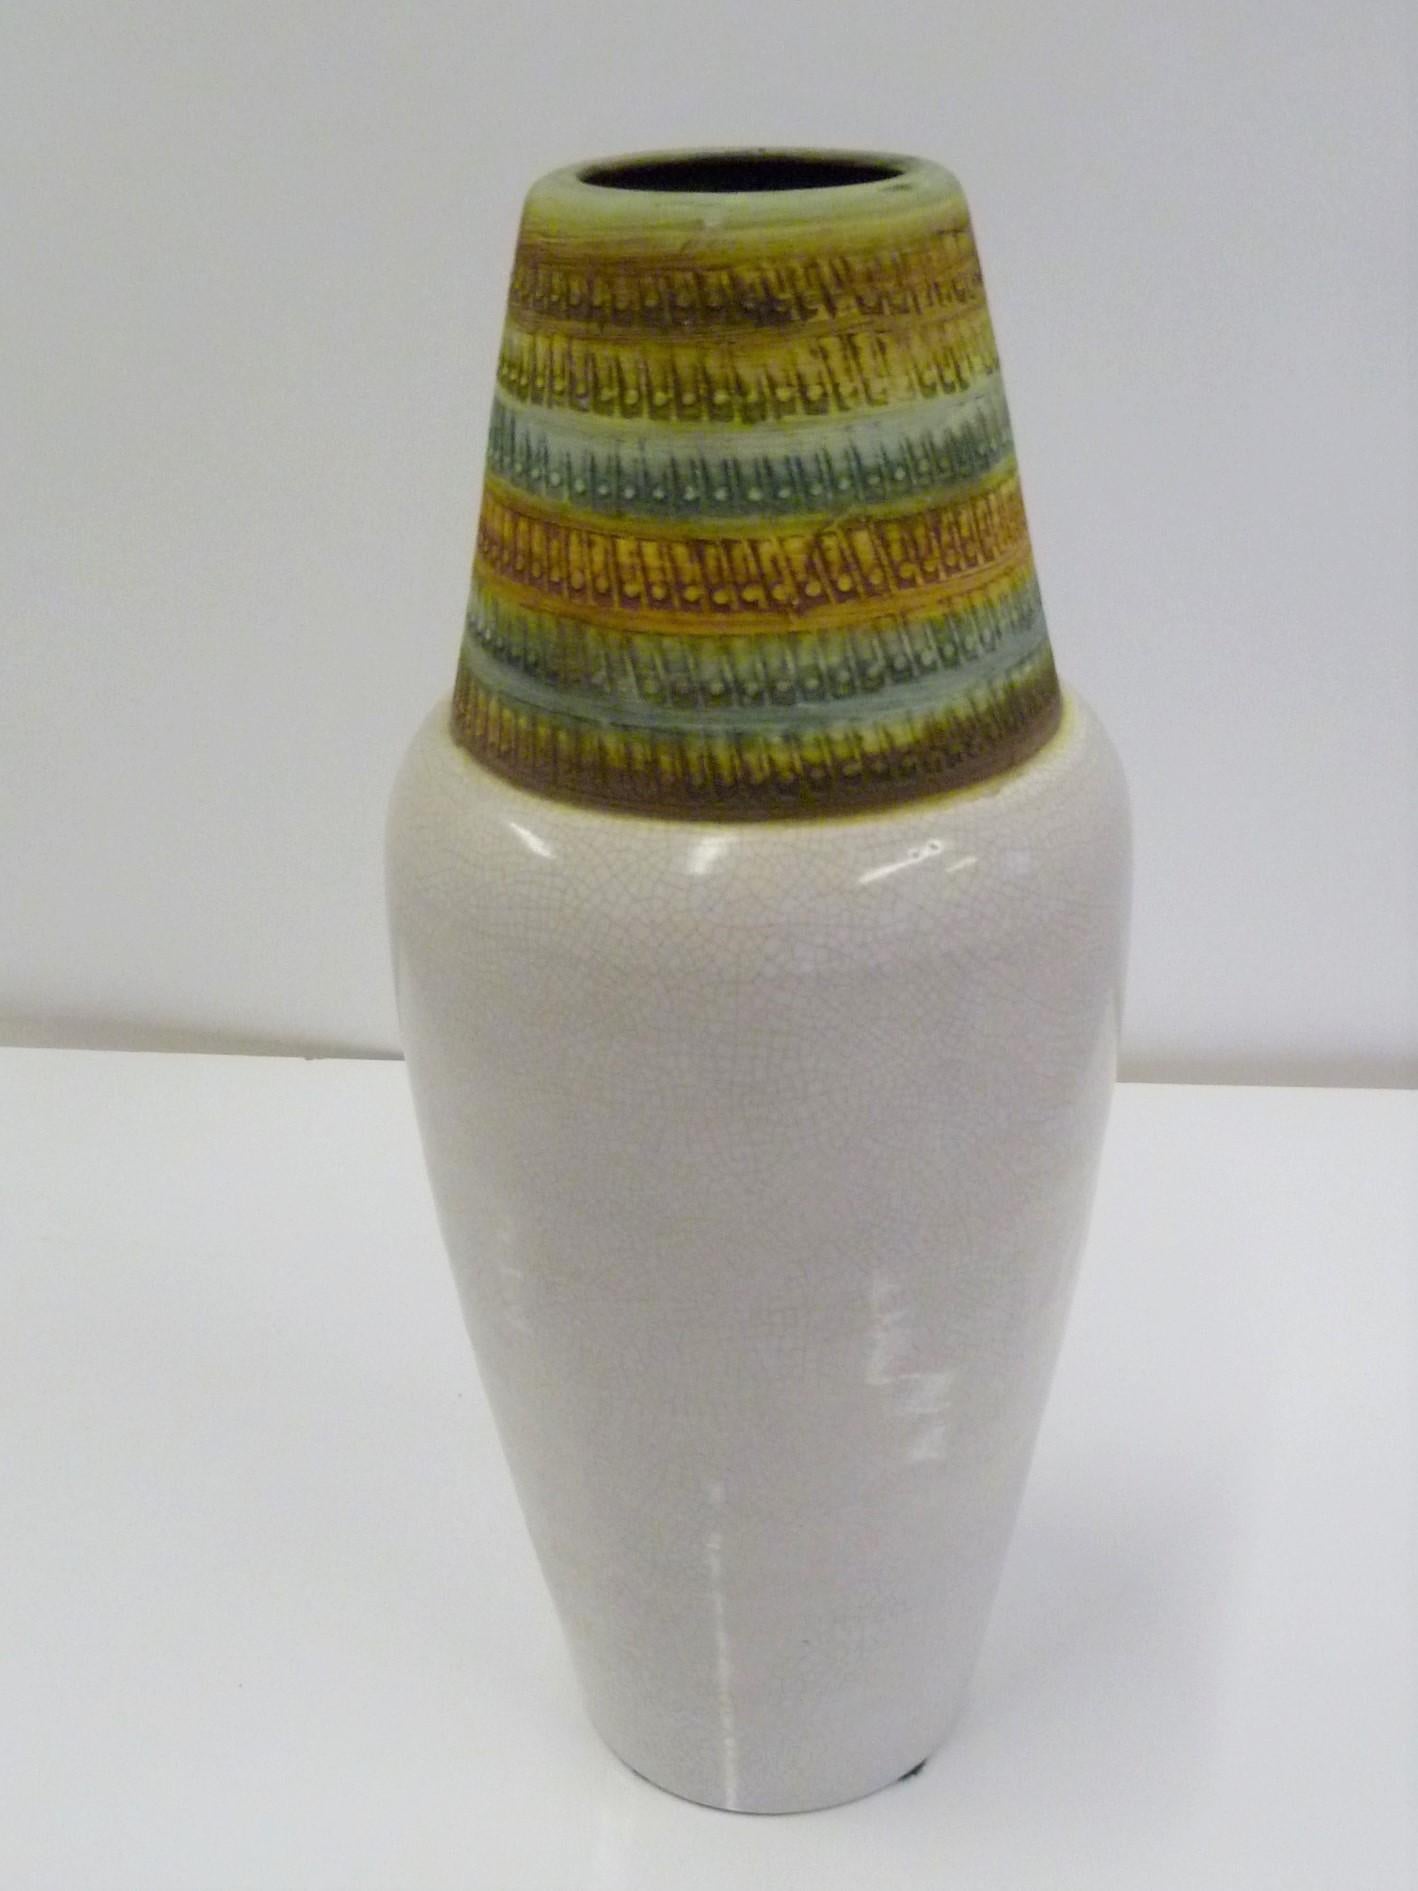 REDUCED FROM $450....A 1960s import from Italy, this tall Bitossi vase was designed by Alvino Bagni and has a shouldered form with a fine craquelure creamy glaze on the bottom topped with a textural impressed conical head and mouth in matte glaze in